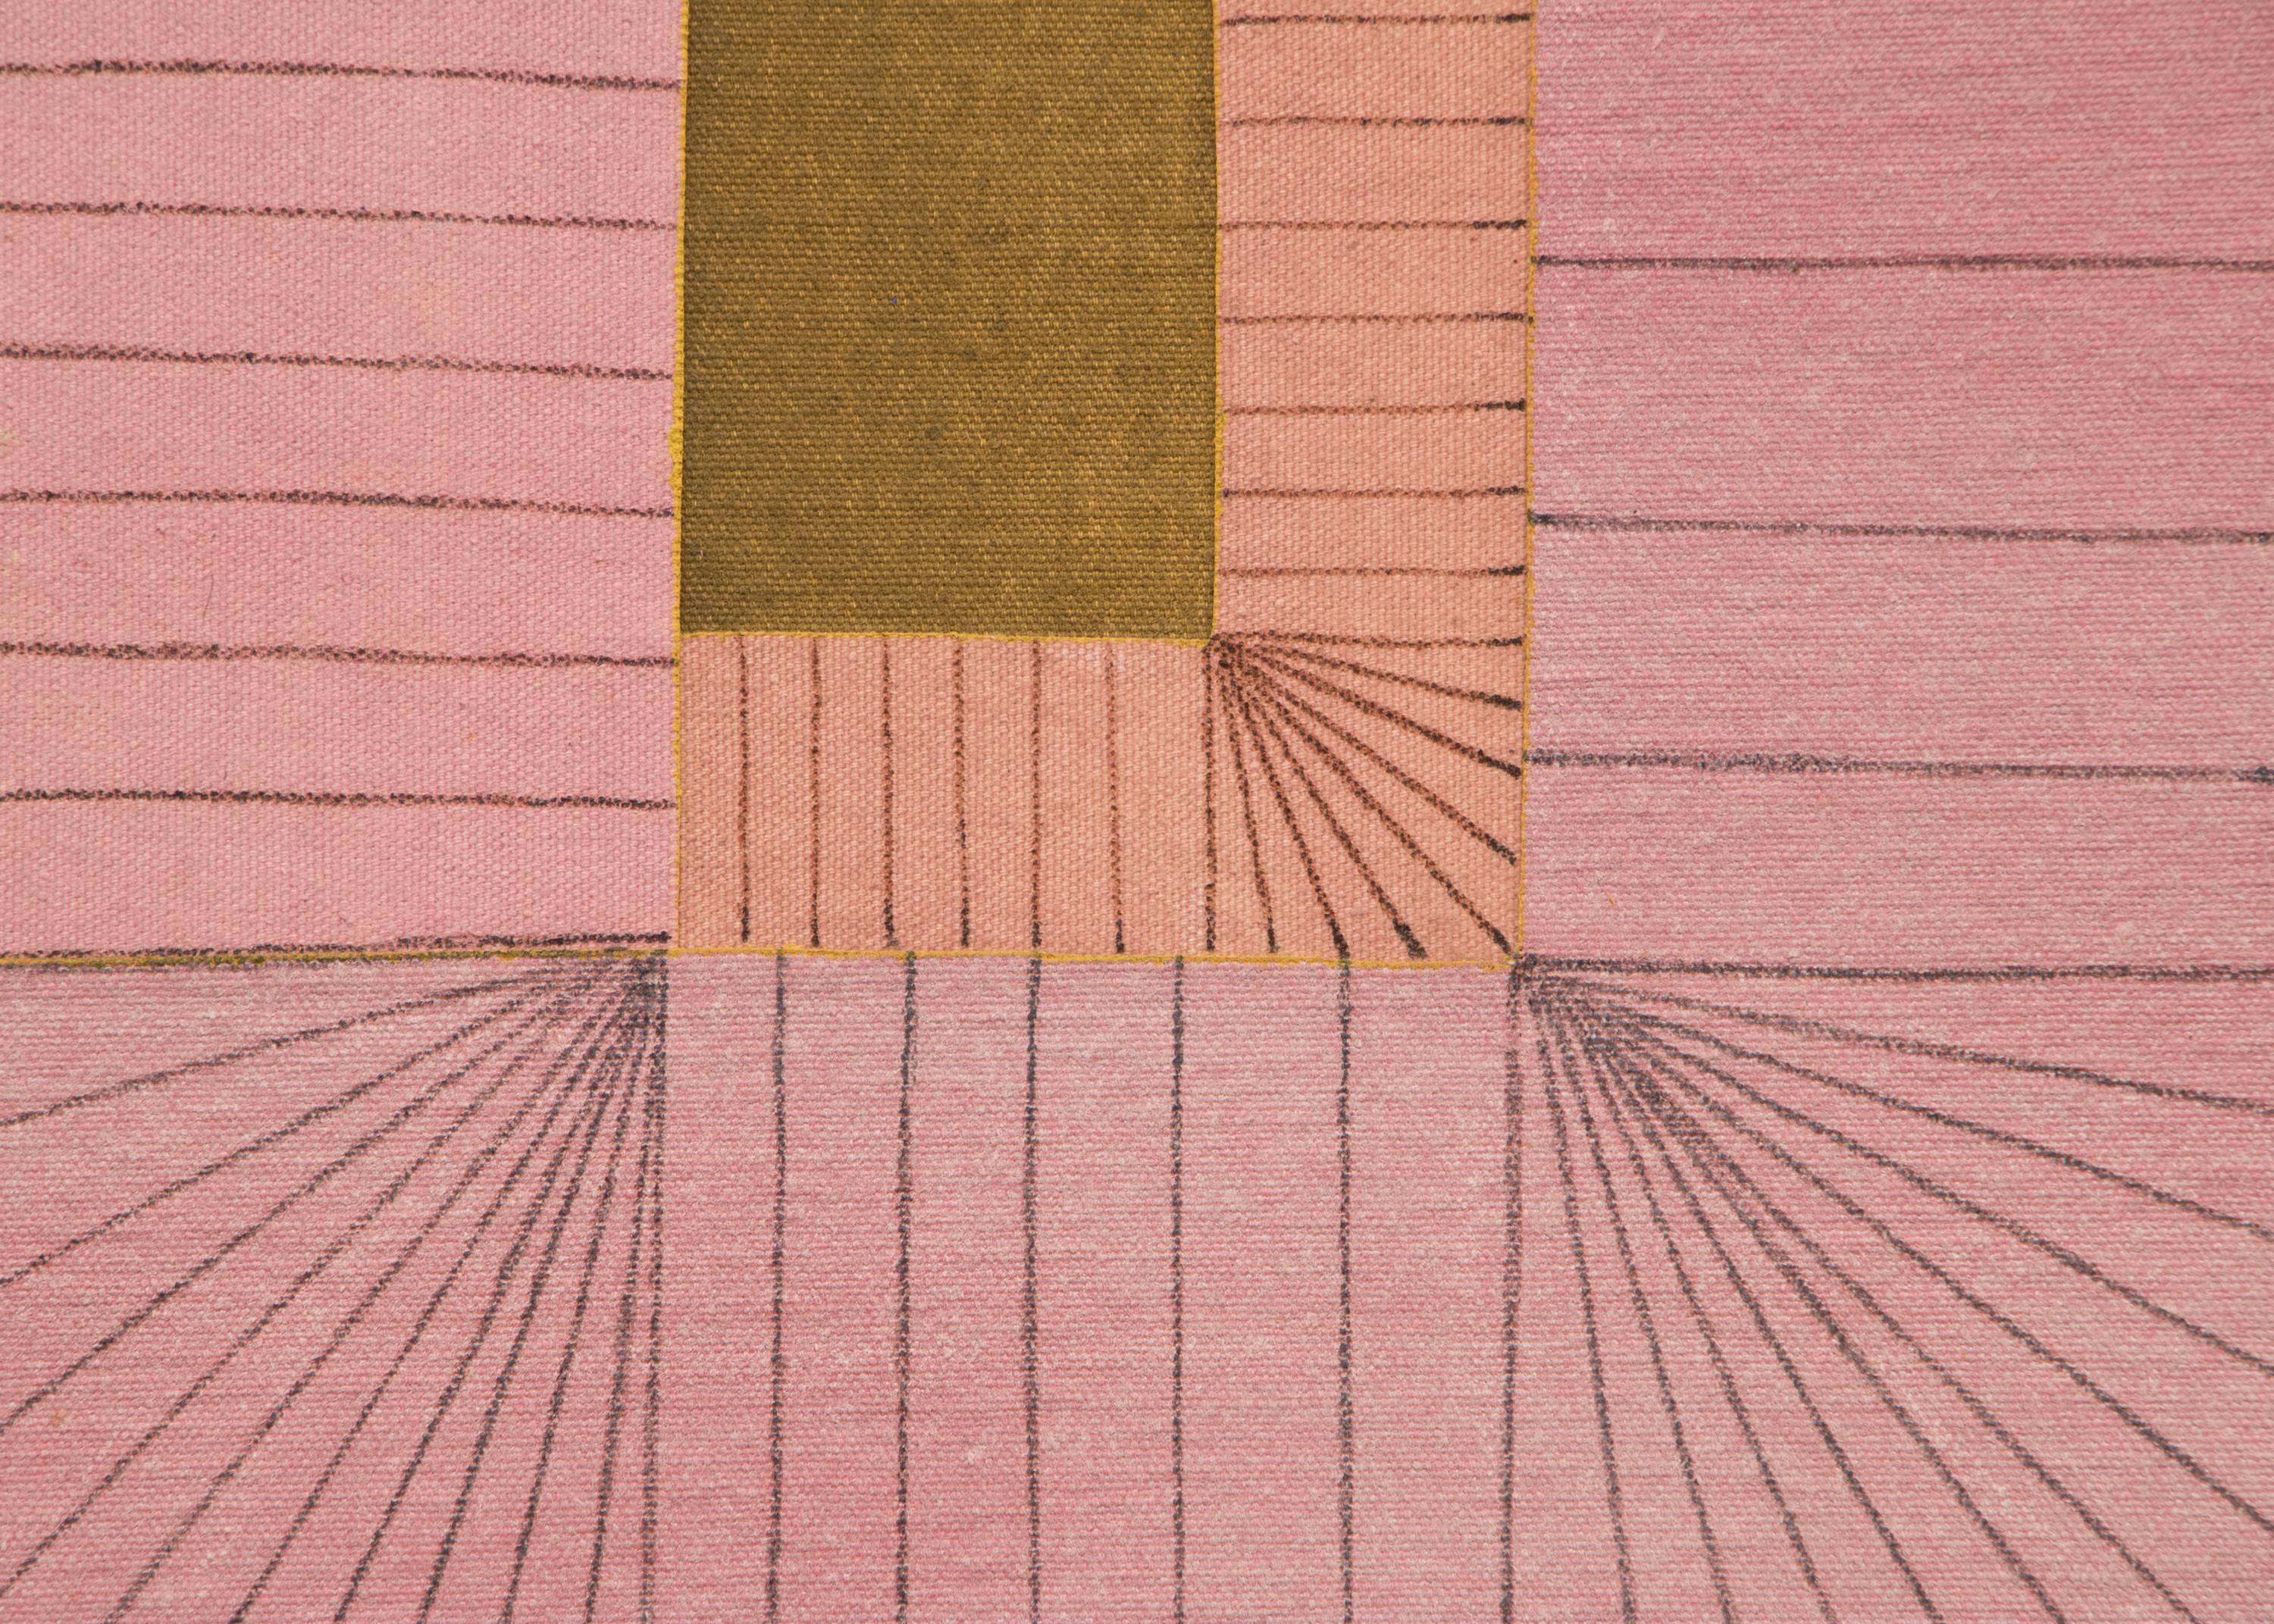 Untitled (Abstract in pink, coral, brown and black) - Painting by Margo Hoff